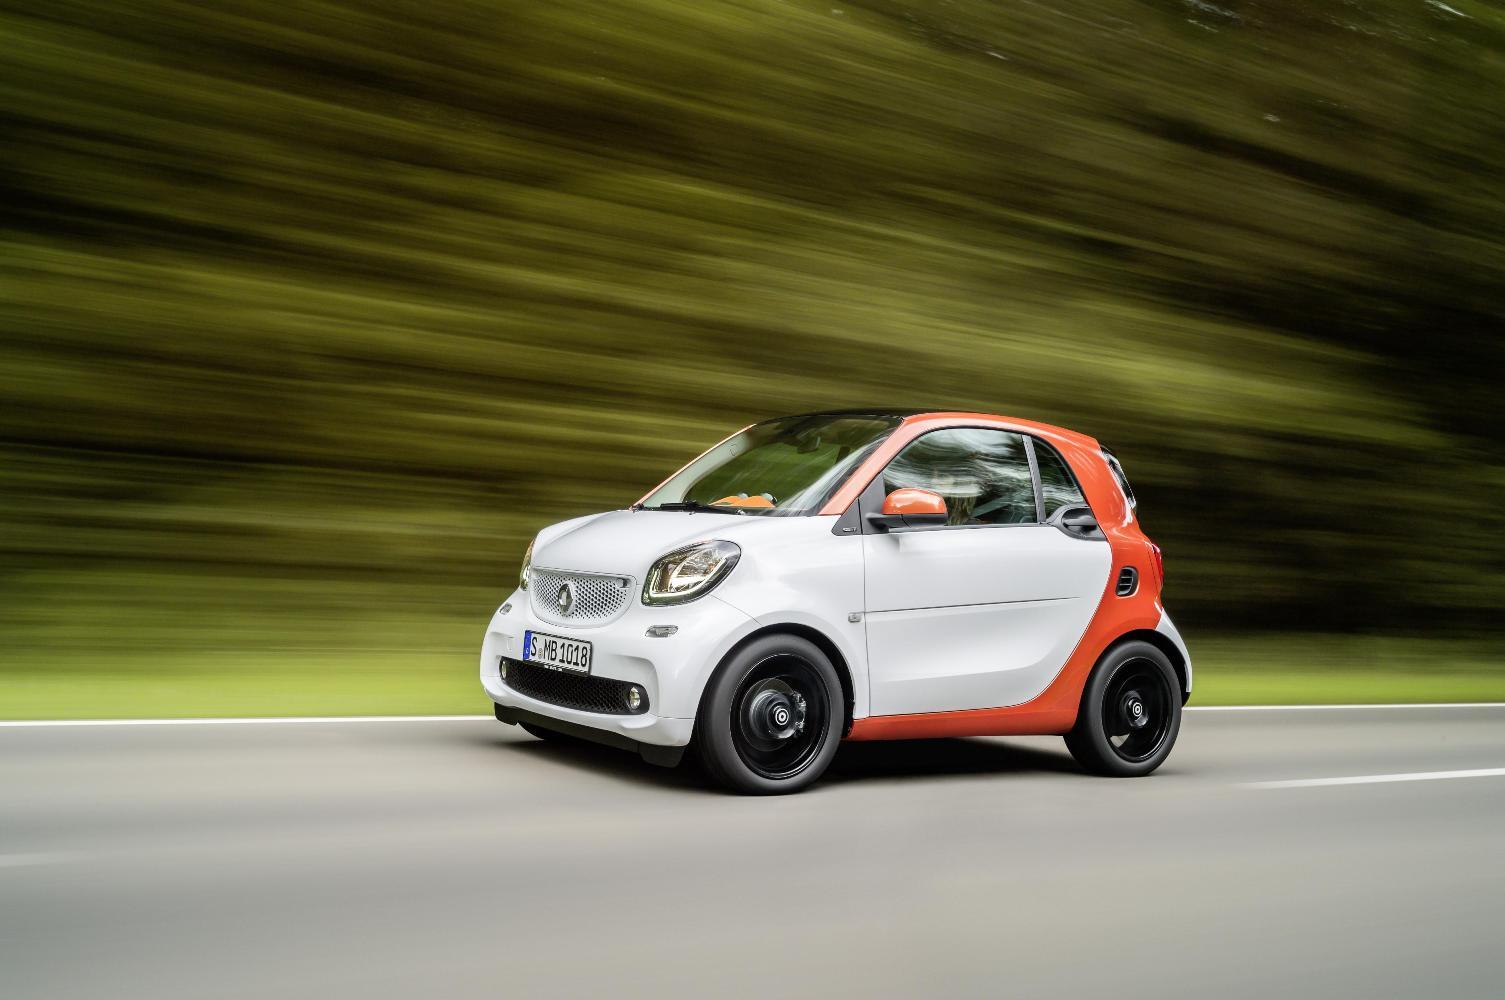 Smart Forfour Ready to Dominate your Desktop with HD Wallpaper